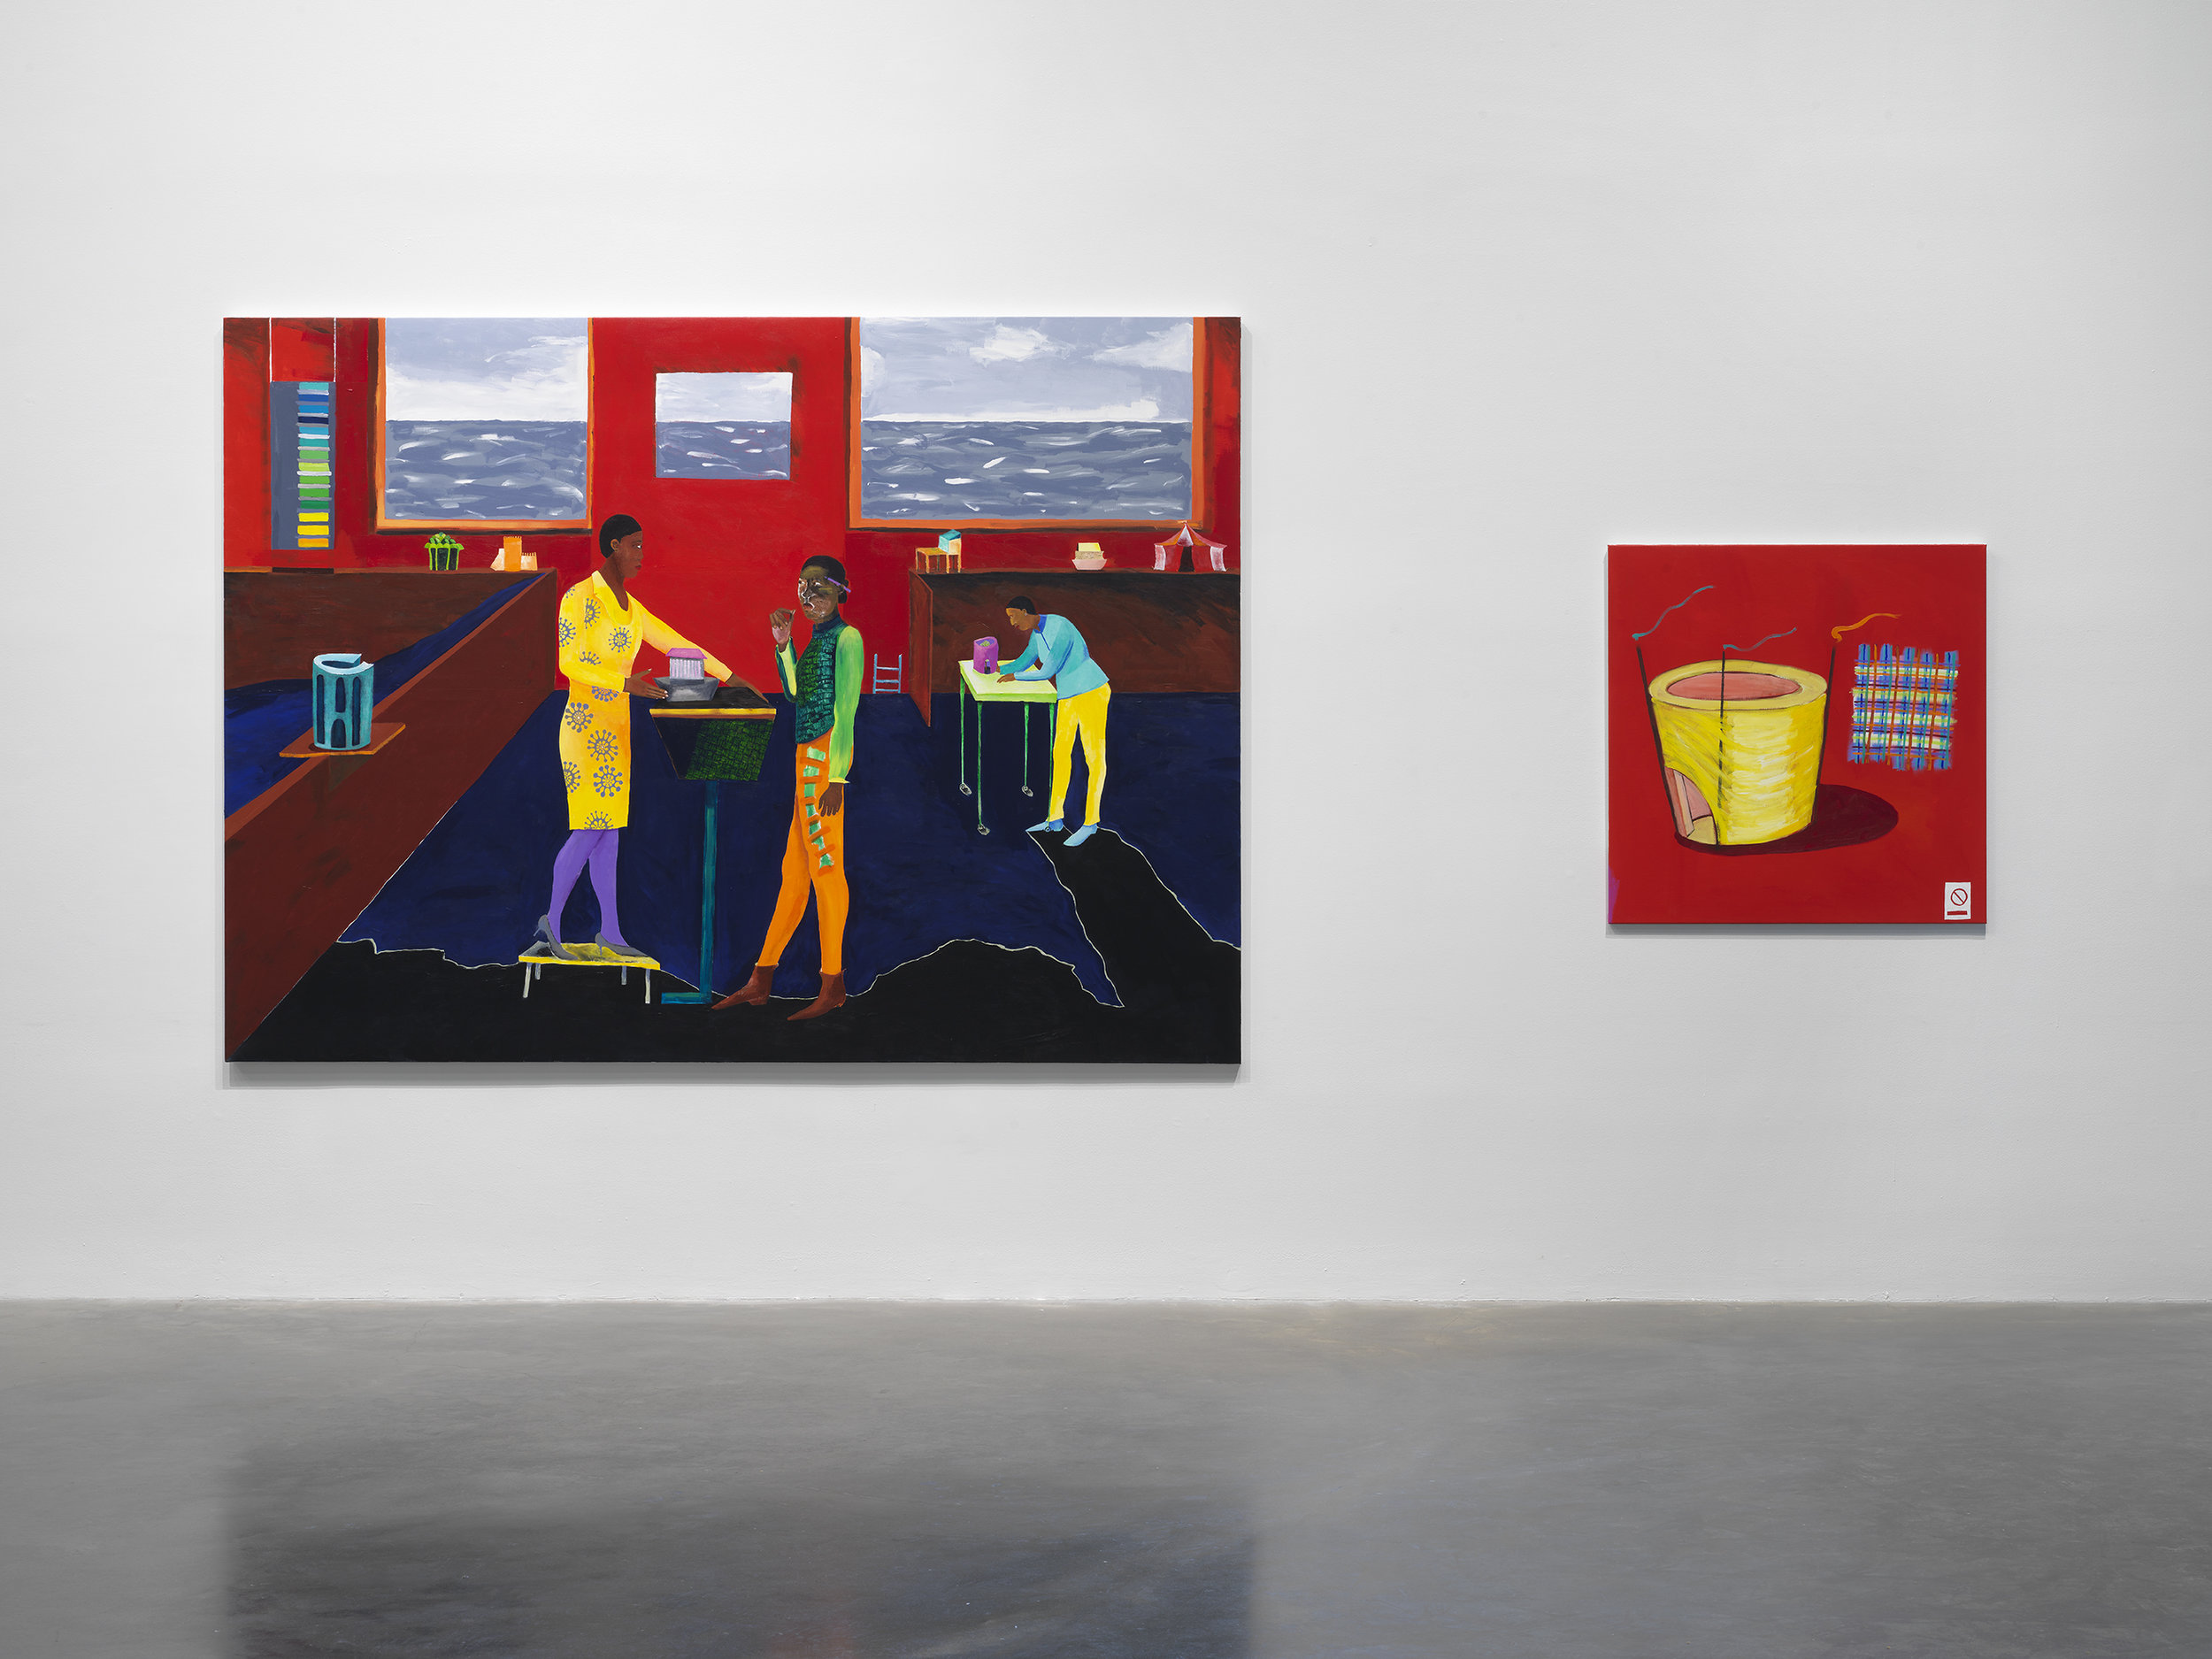  “Lubaina Himid: Work from Underneath,” 2019. Exhibition view: New Museum, New York. Photo: Dario Lasagni 